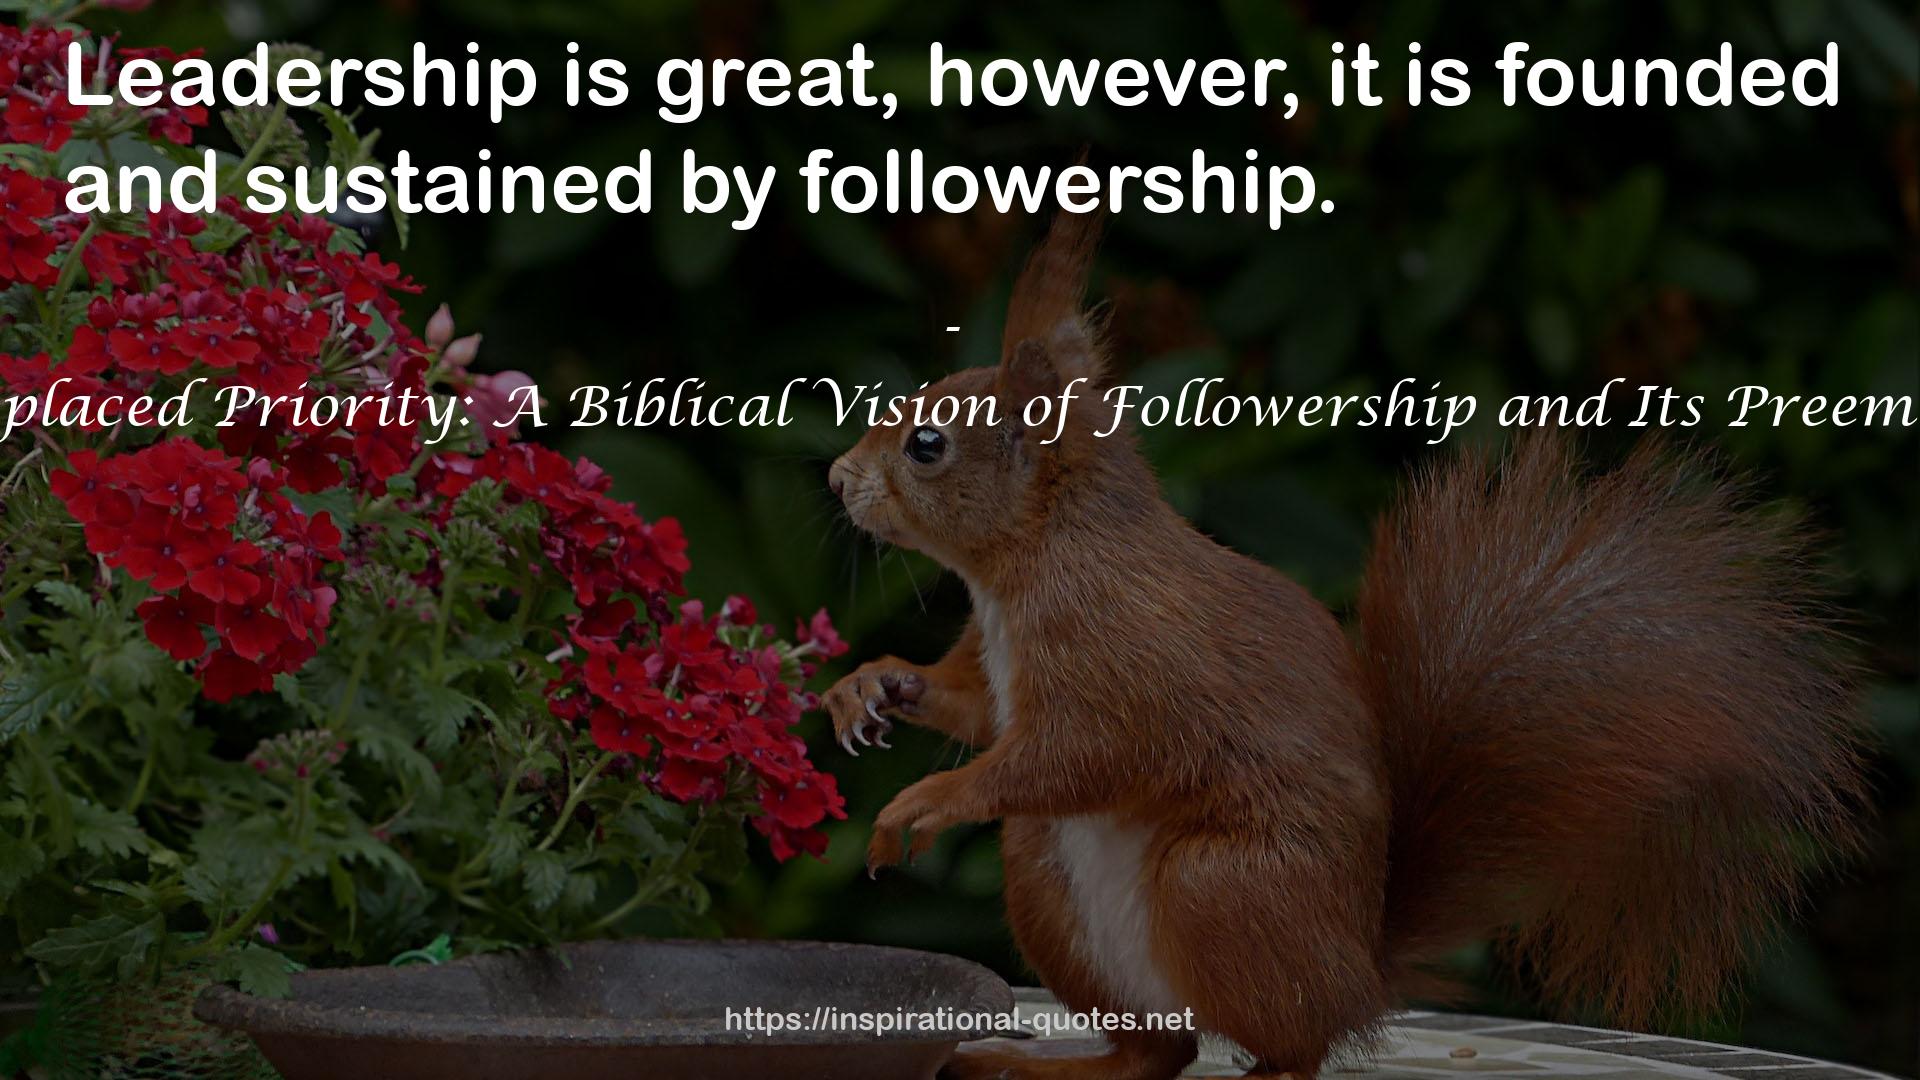 A Misplaced Priority: A Biblical Vision of Followership and Its Preeminence QUOTES